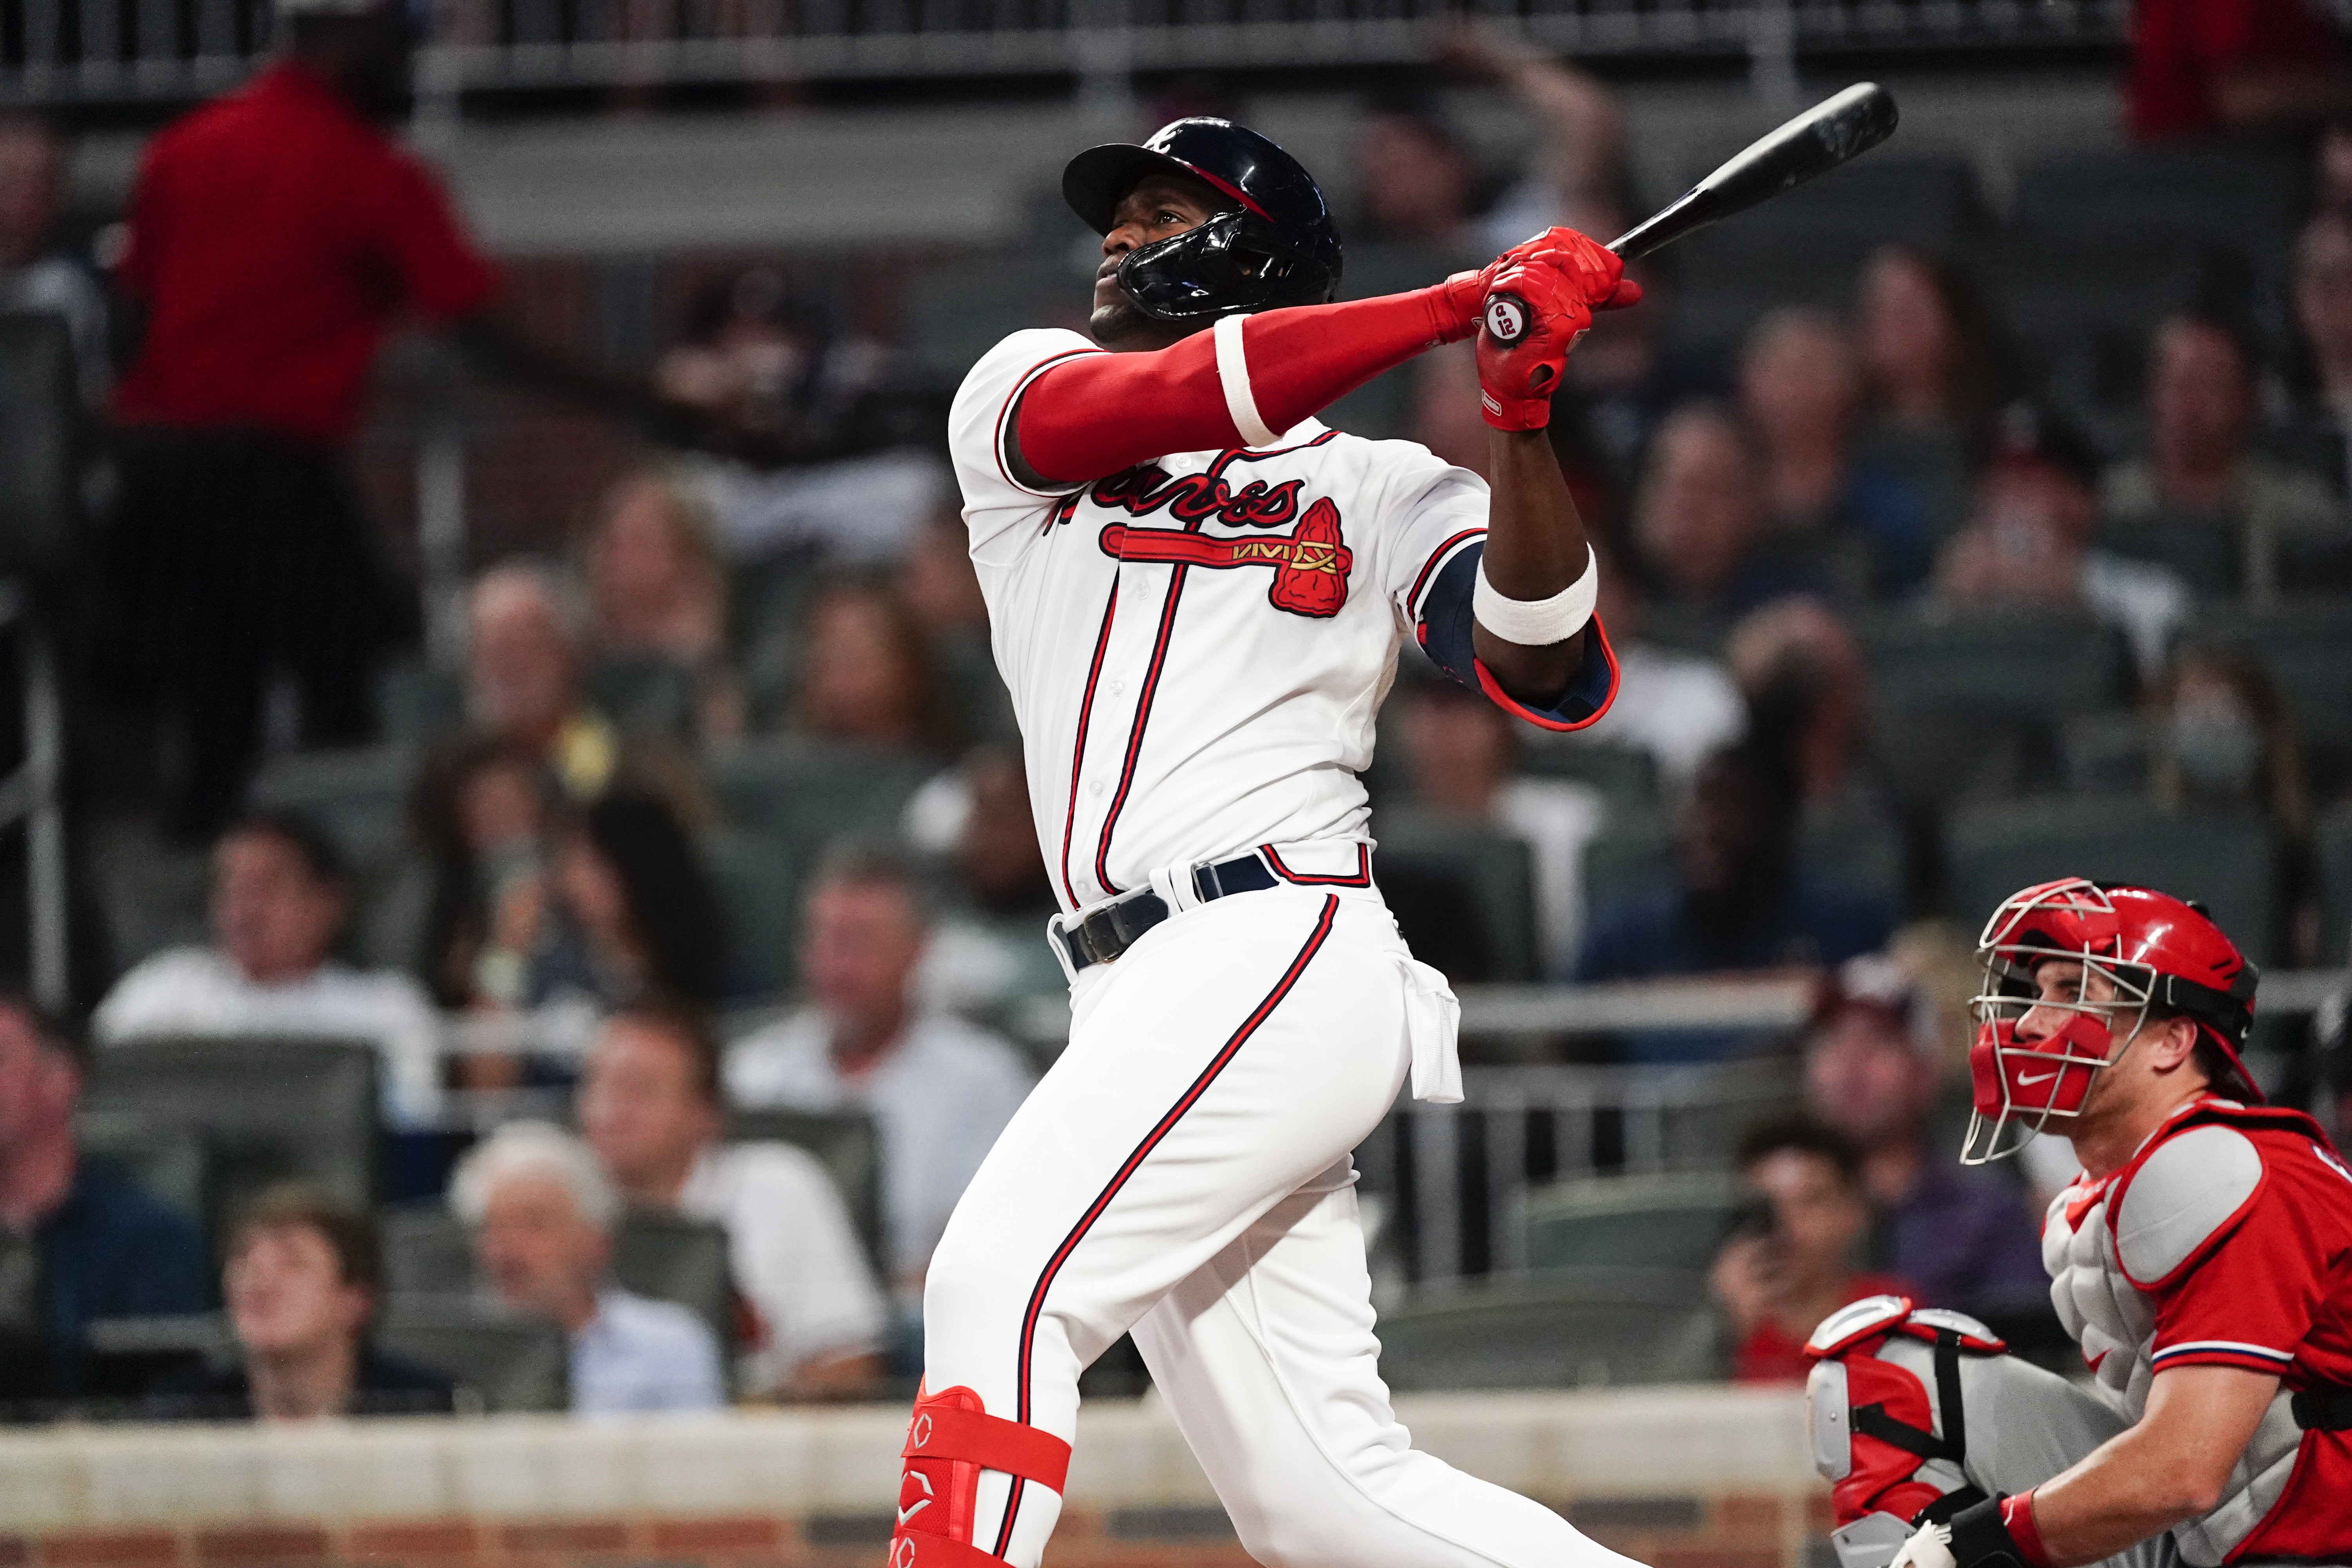 Beasts of NL East: Braves beat Phils for 4th straight title - The